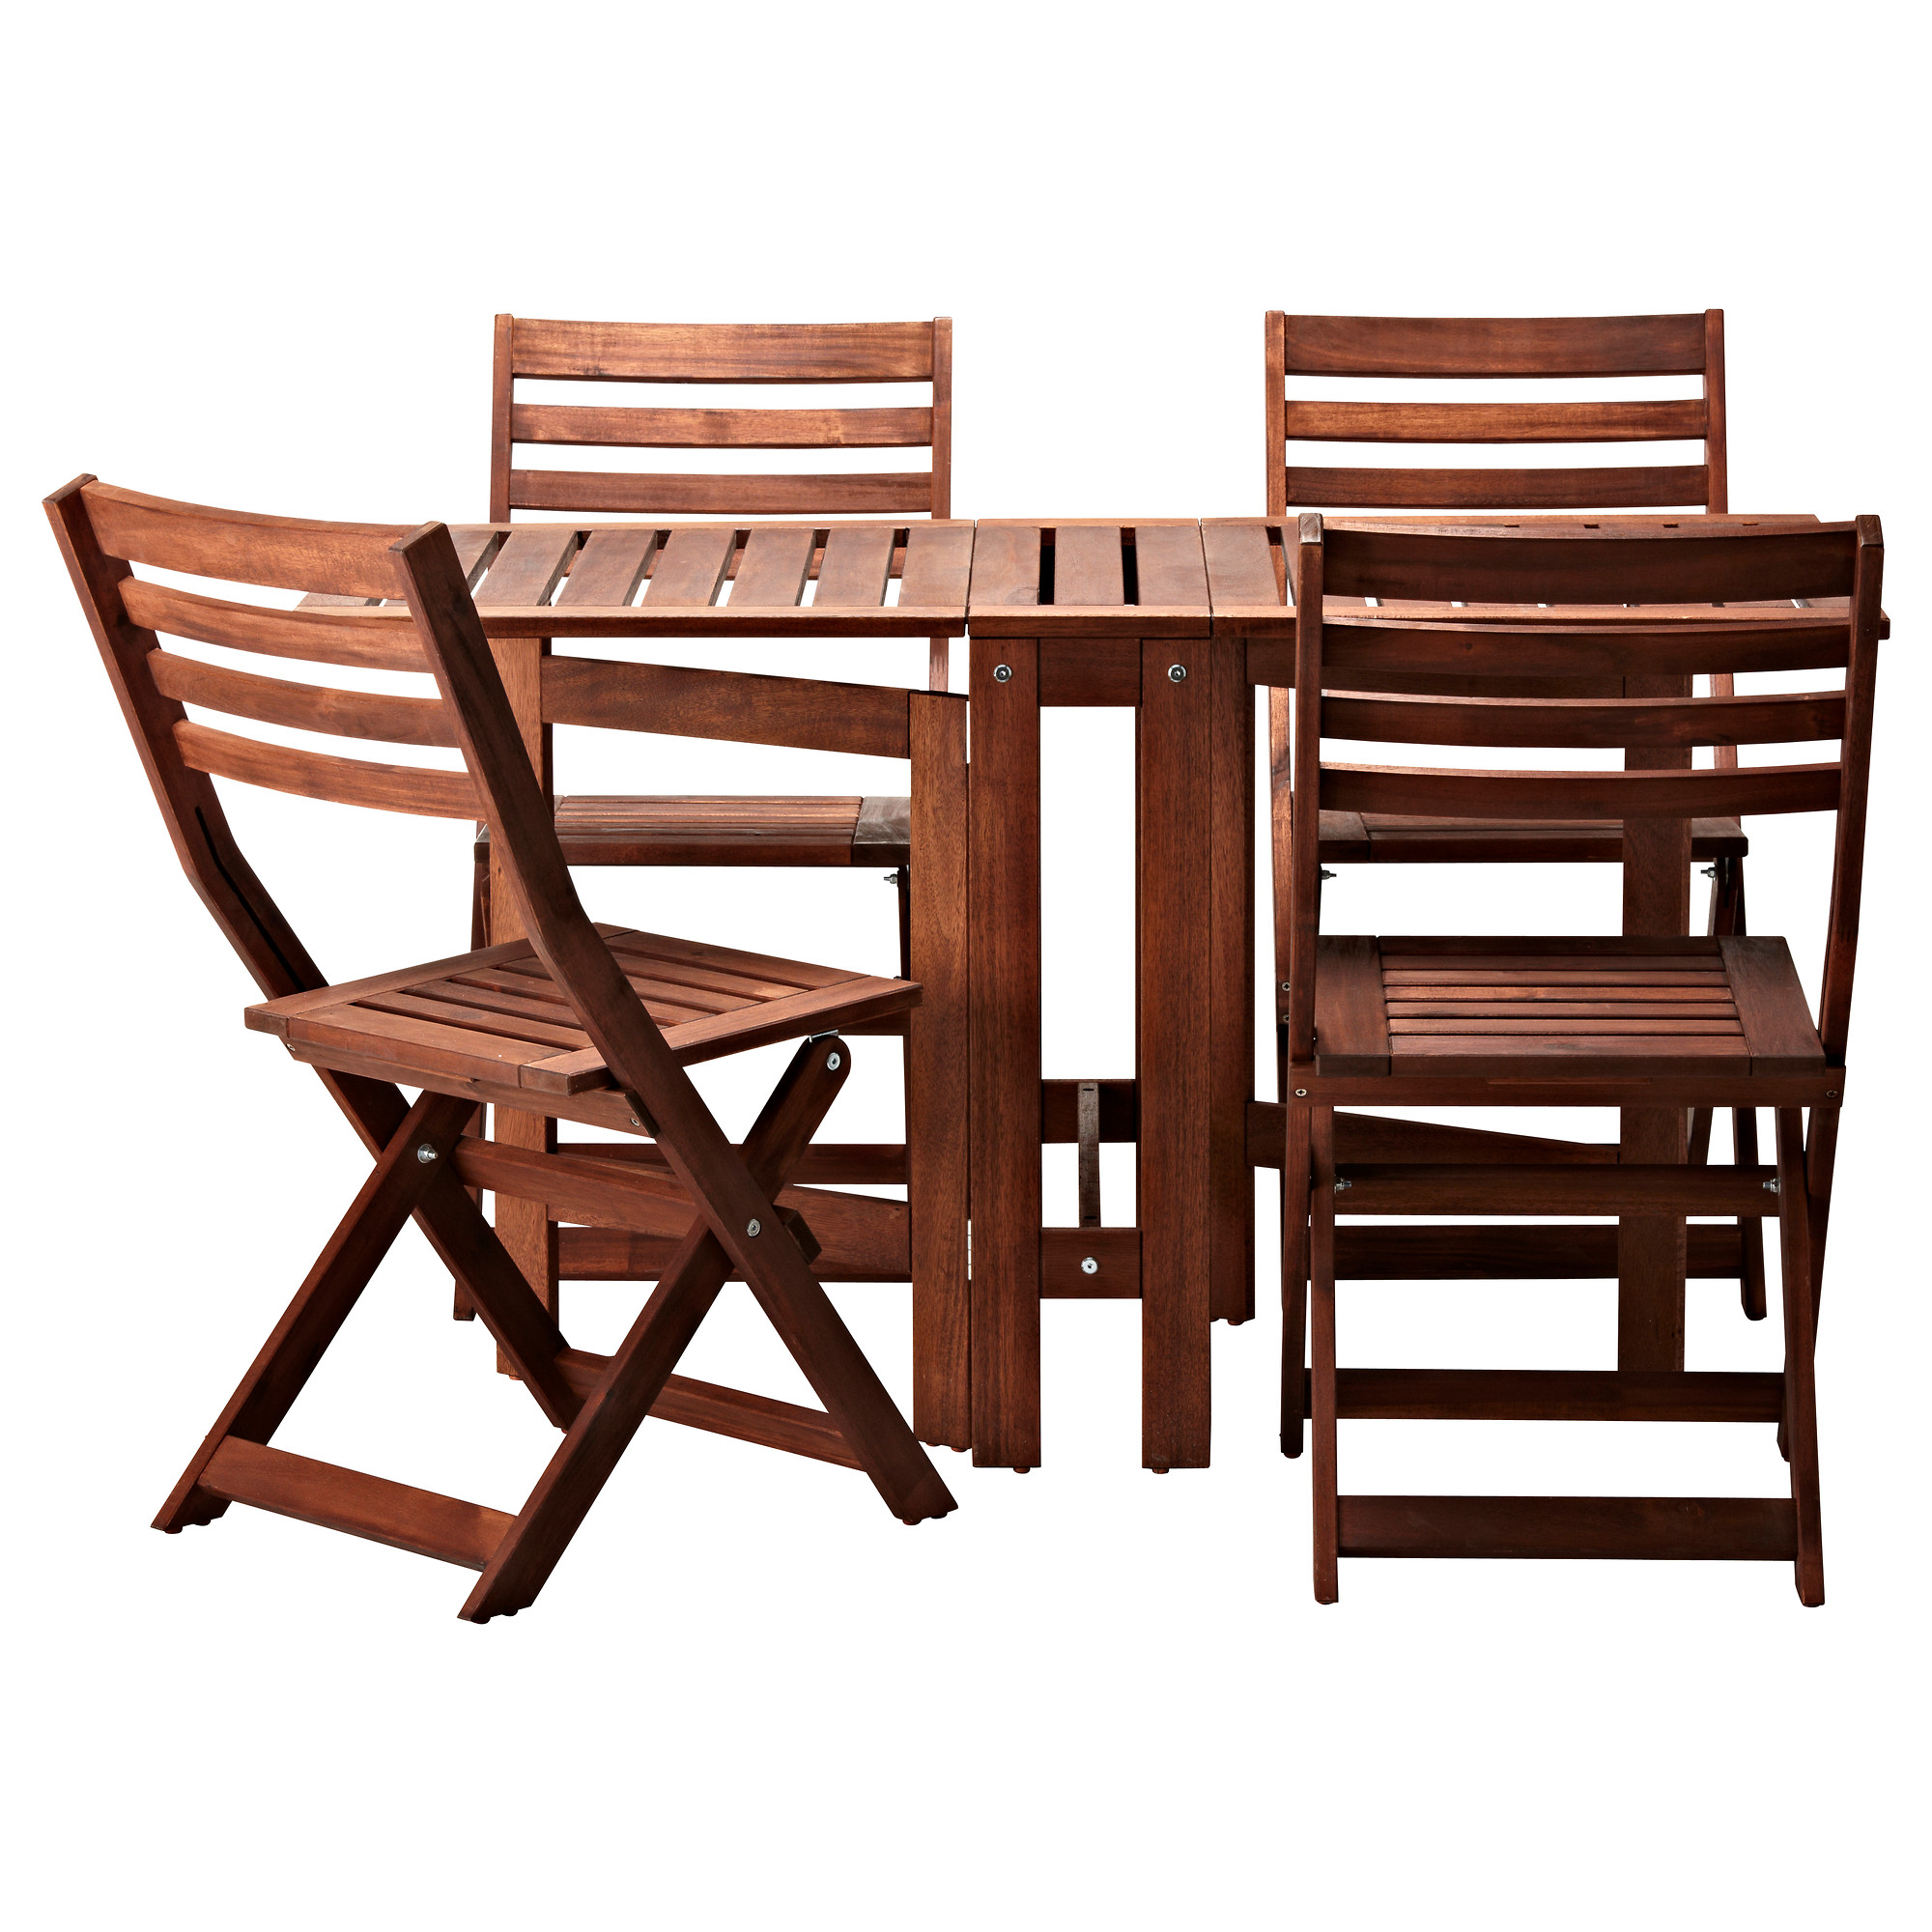 Stunning ÄPPLARÖ table and 4 folding chairs, outdoor, brown brown stained folding wooden garden furniture sets